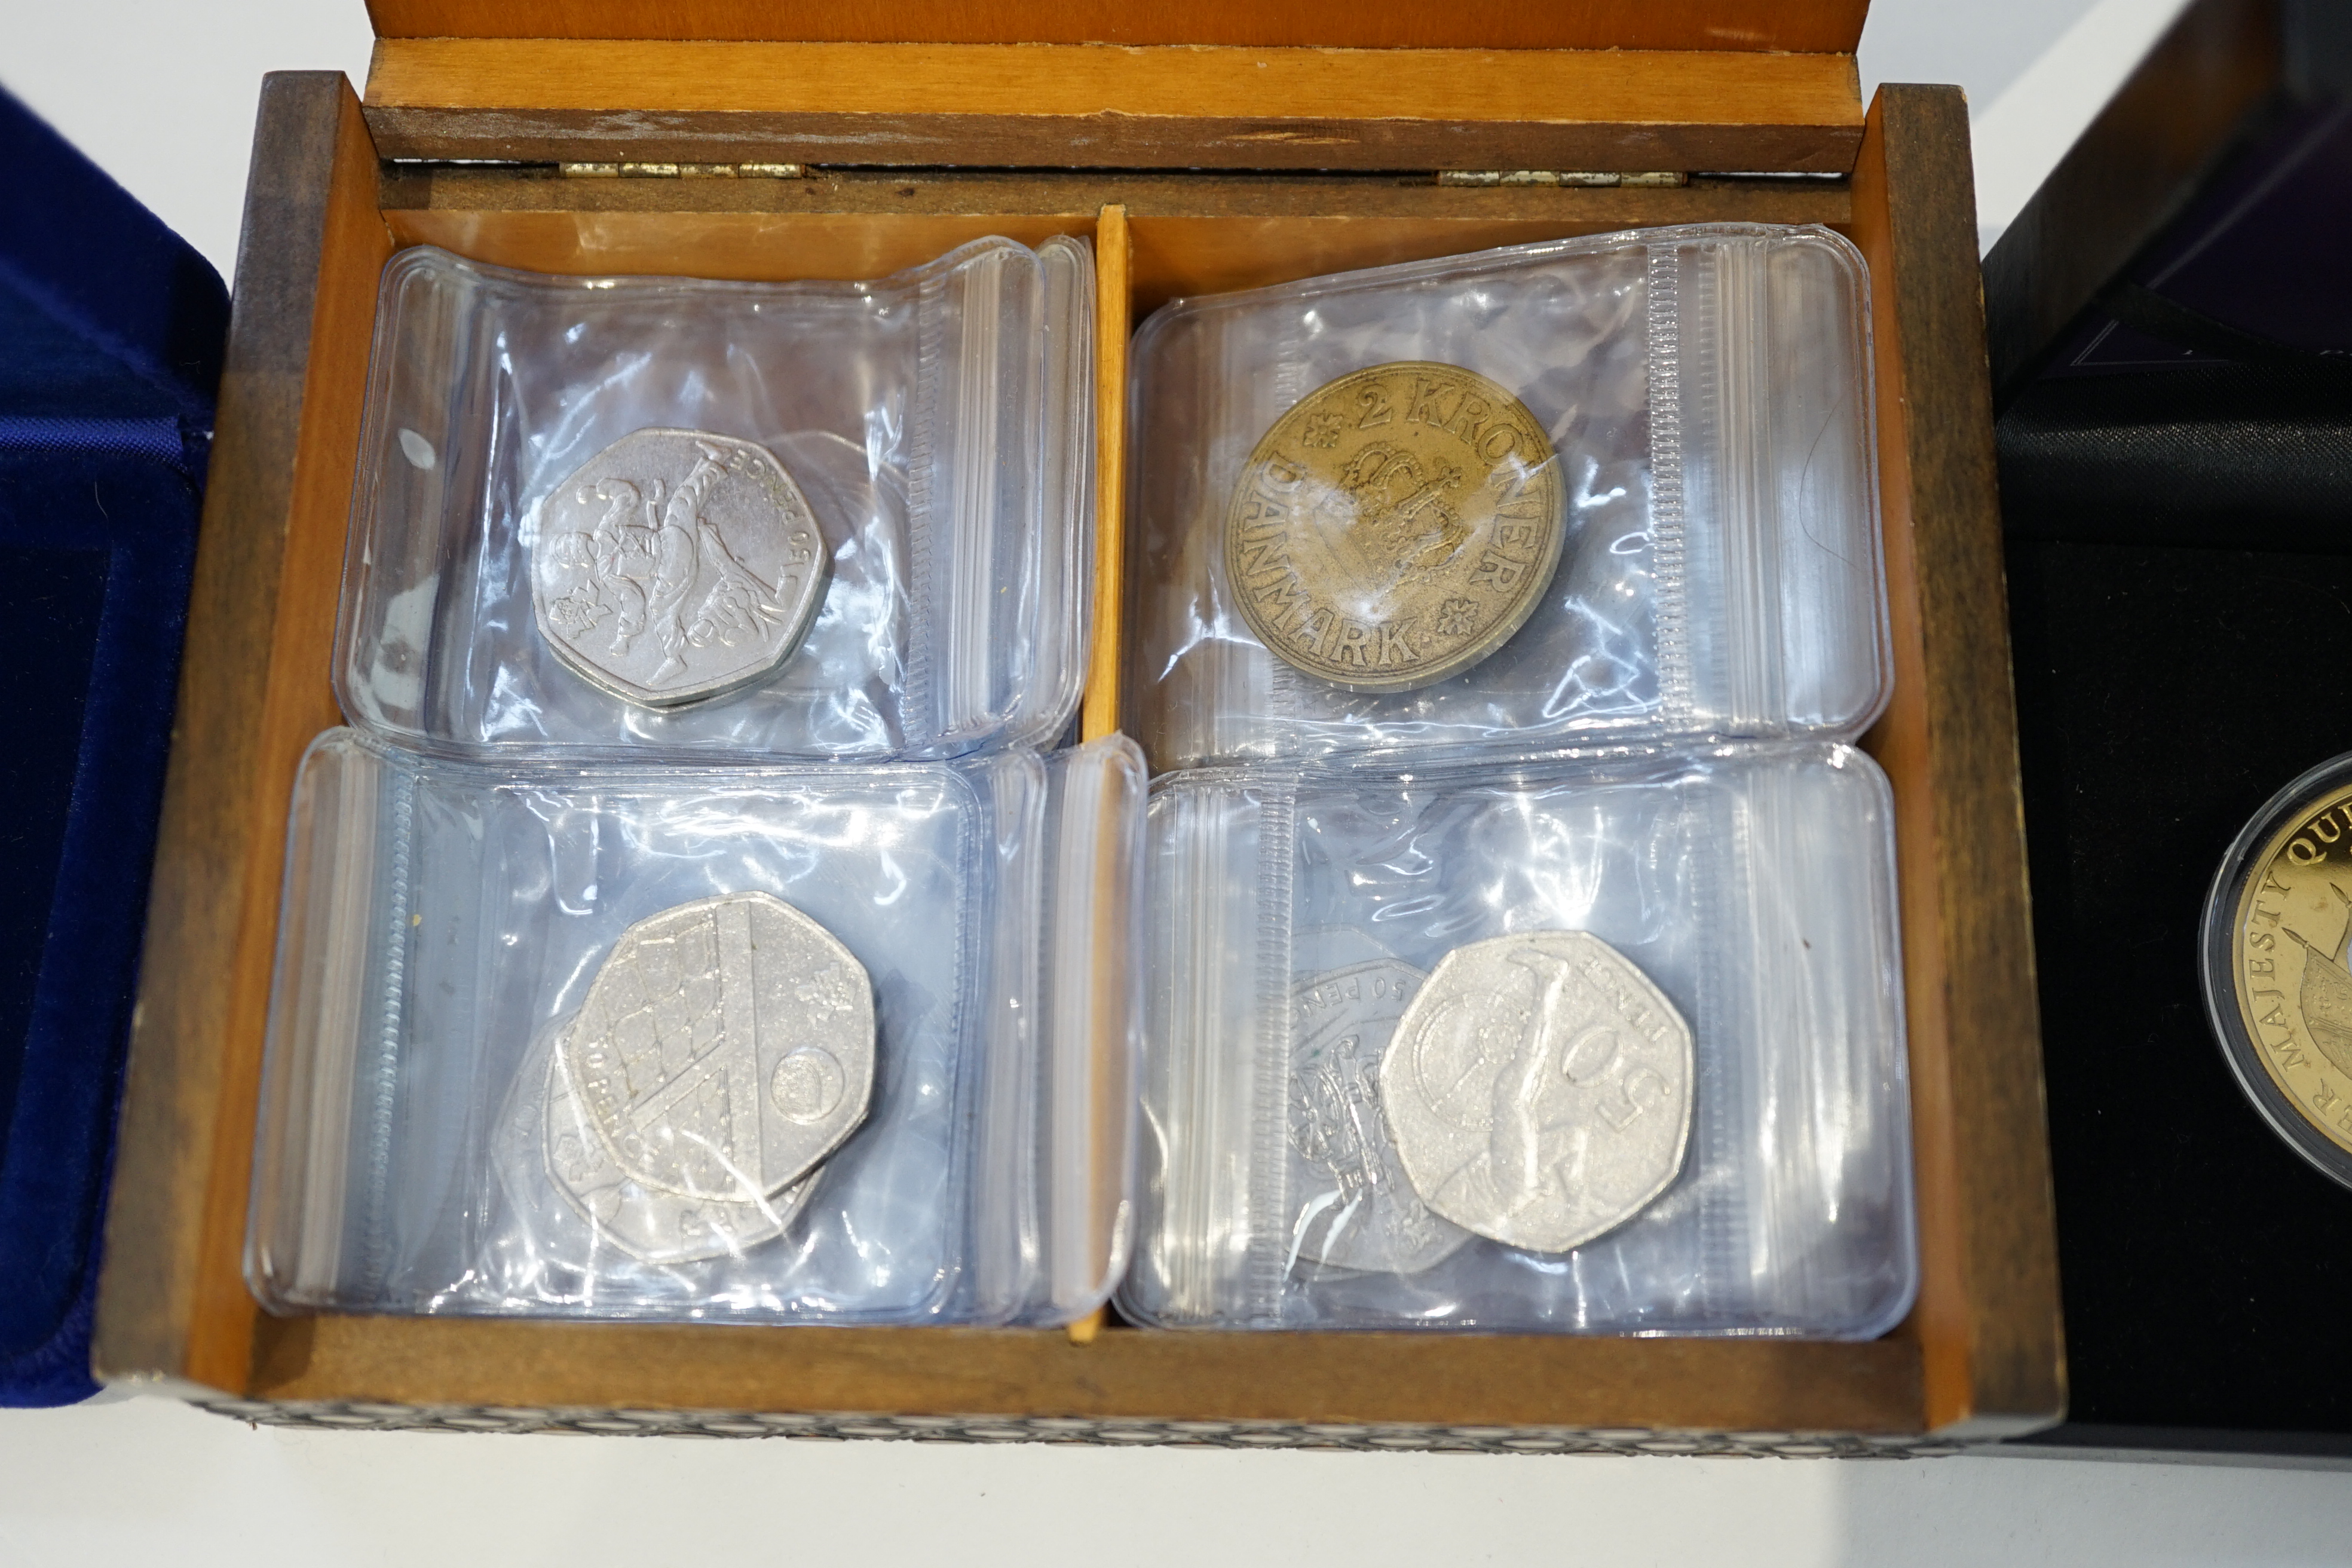 British coins, 1953 coronation coin and commemorative stamp set issued by Jubilee Mint, George V First World War maundy silver threepence set, issued by Bradford Exchange, a Bailiwick of Jersey £5, 2016 and Isle of Man o